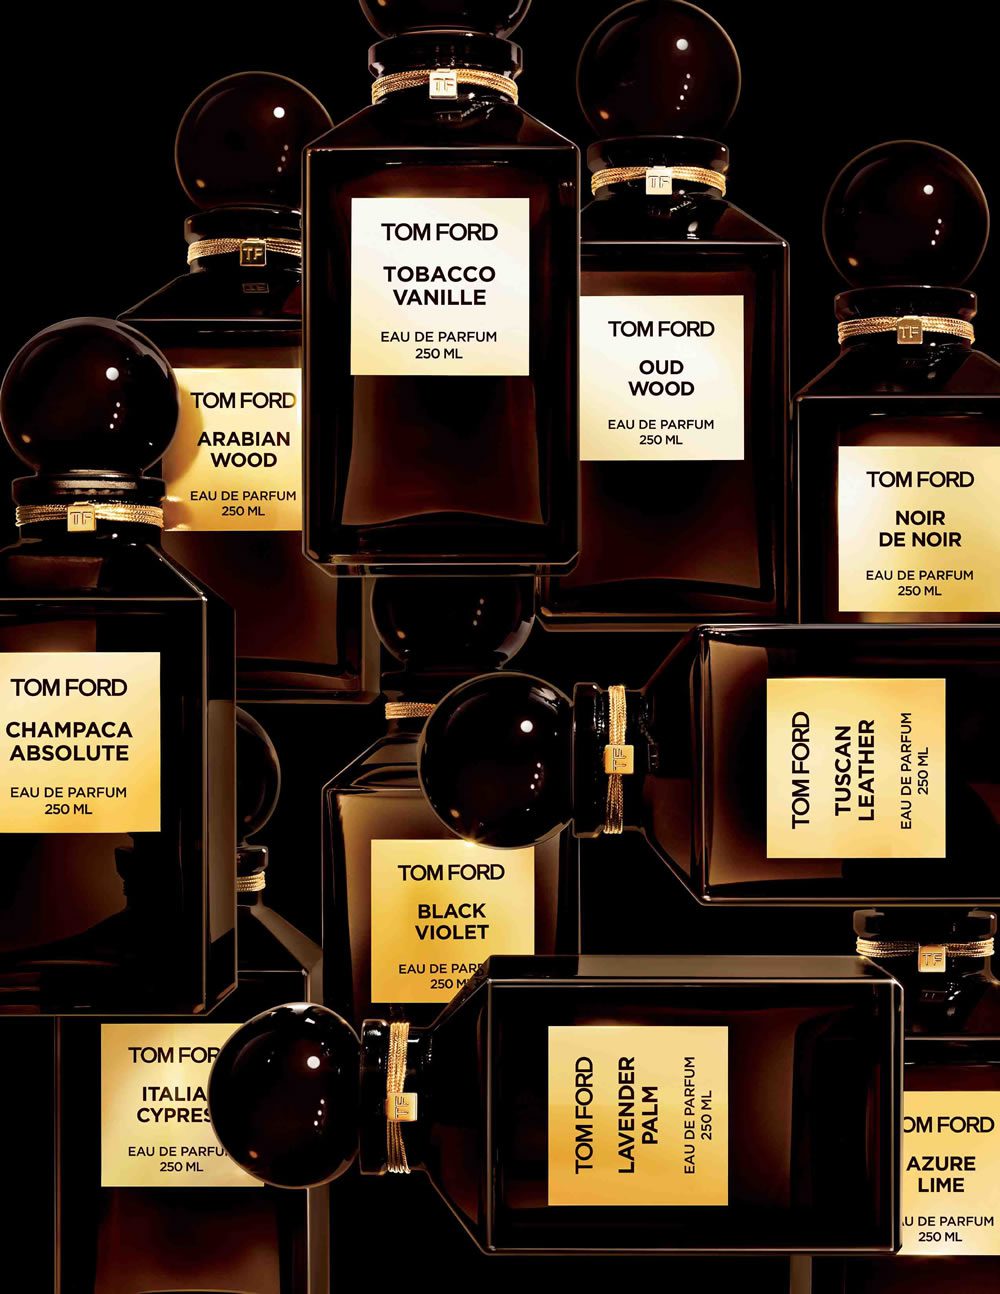 Tom Ford Colognes: A Guide To The Designer's Most Scents